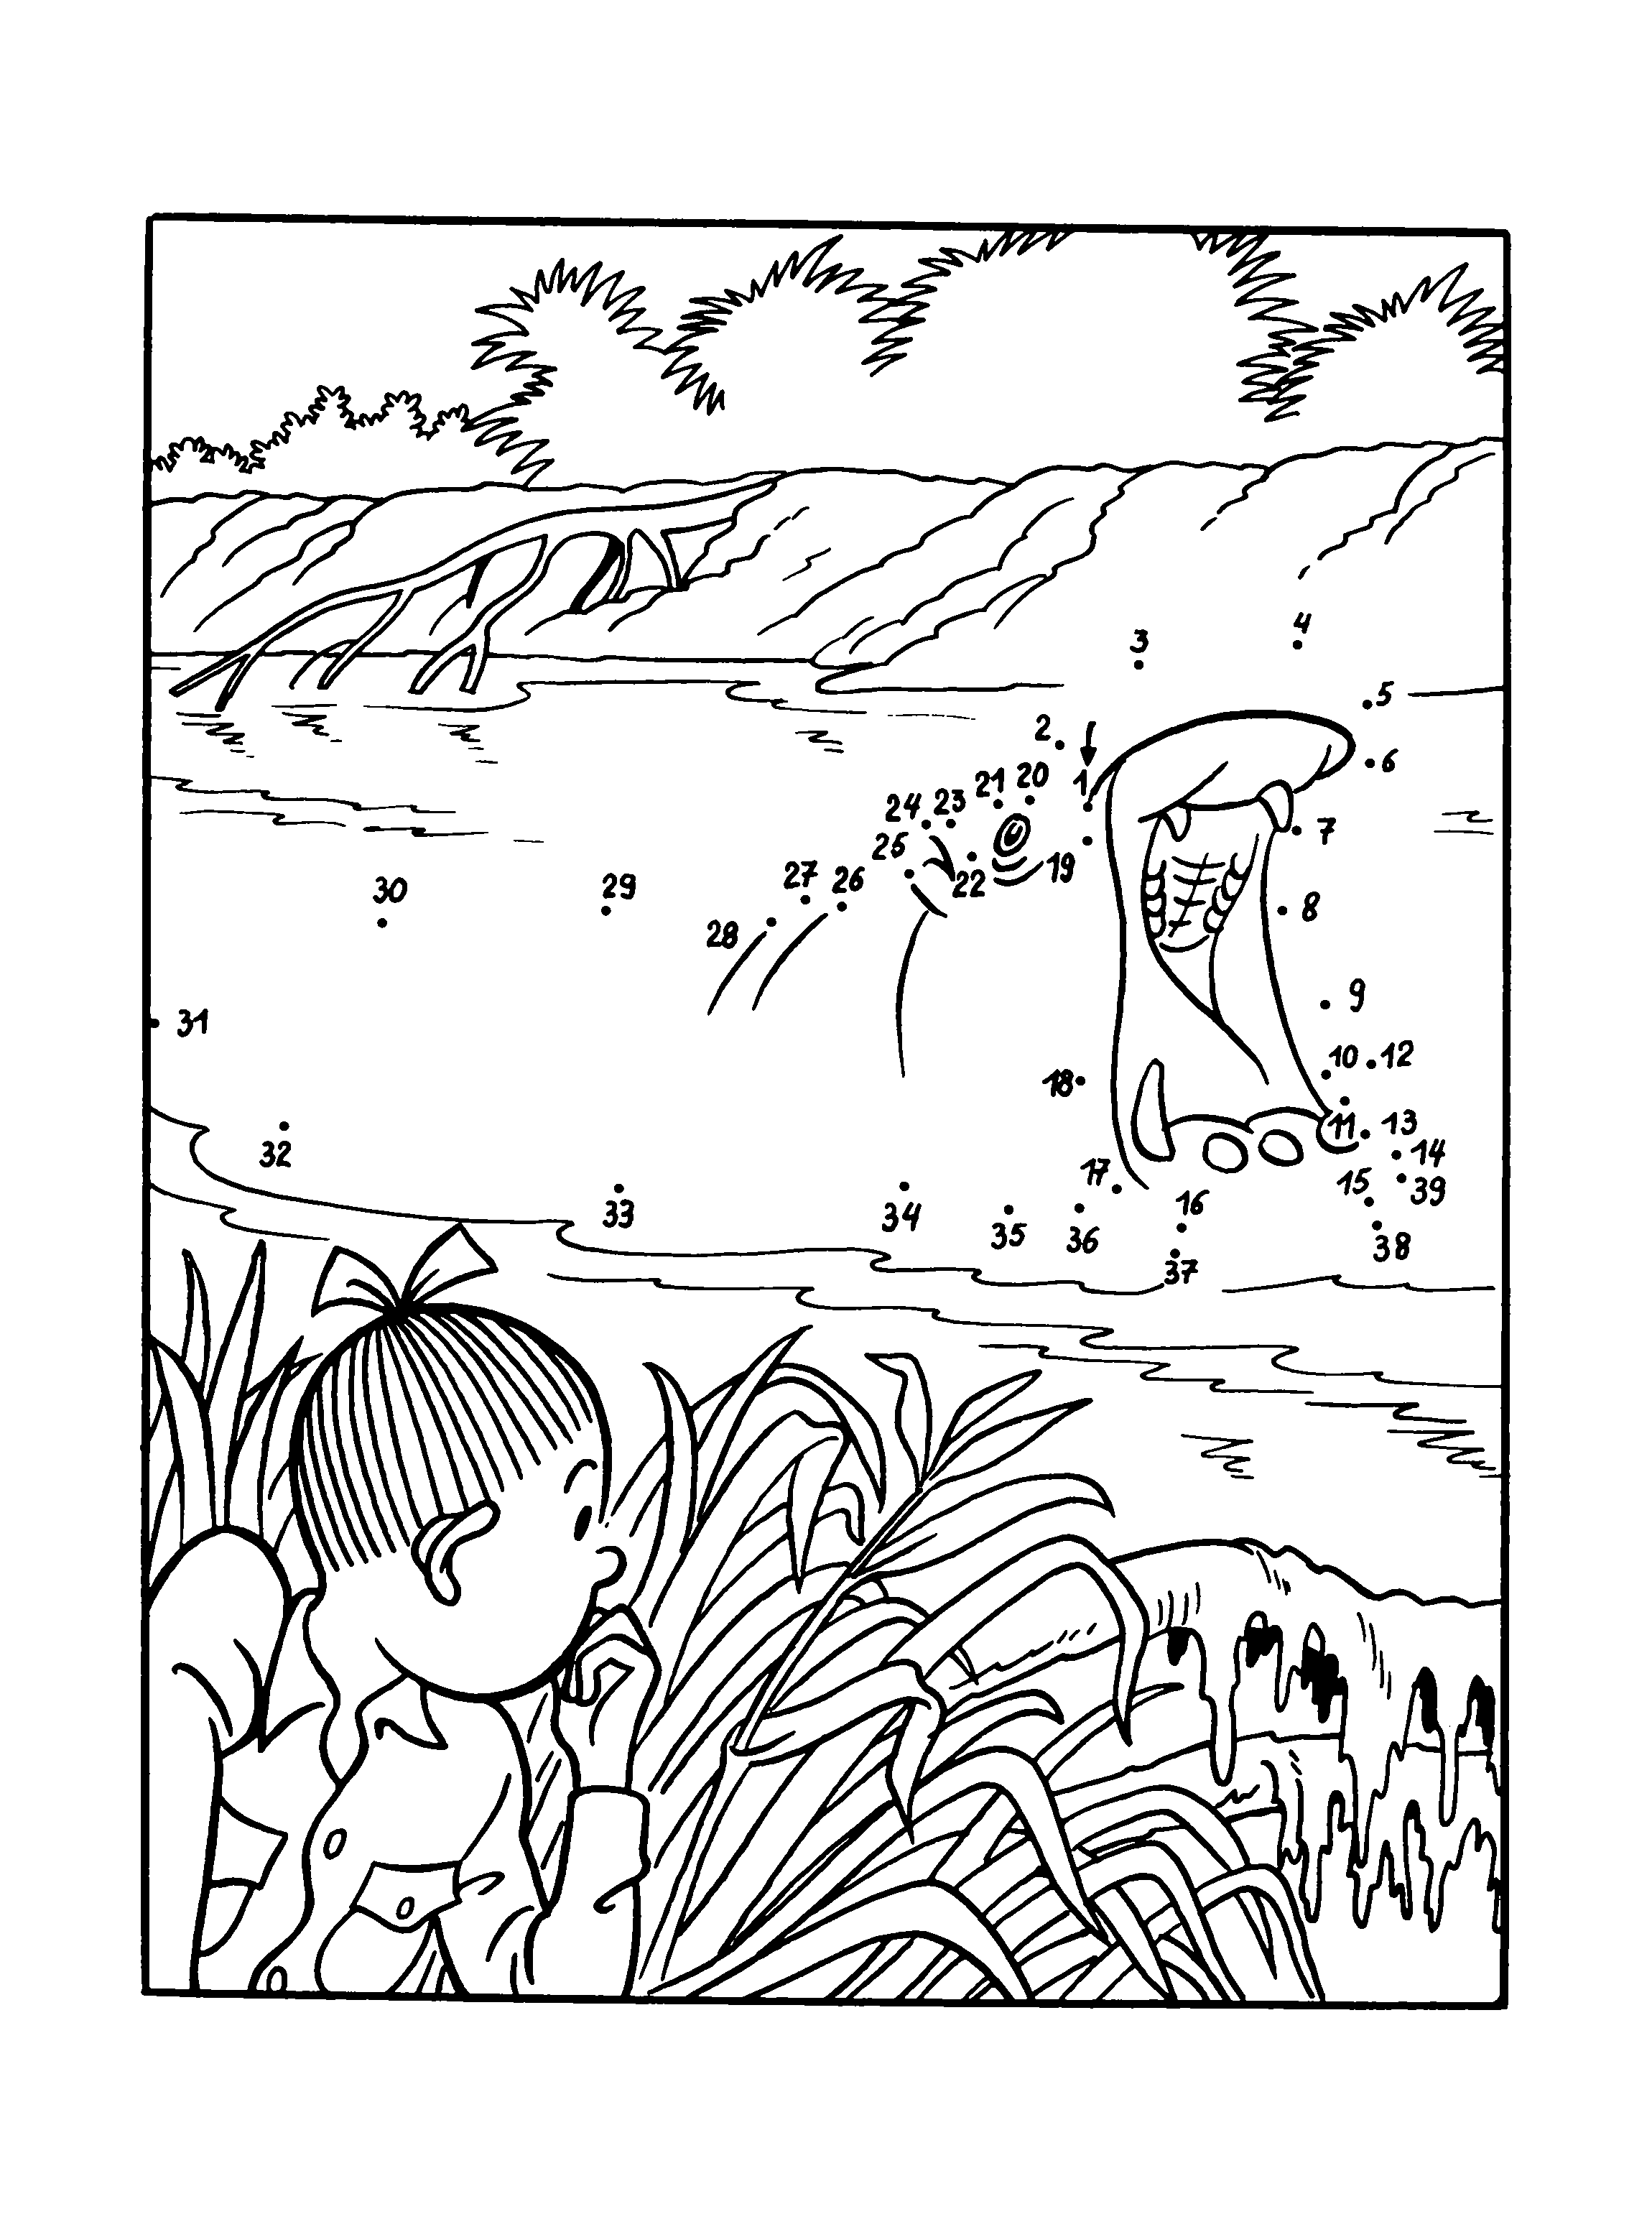 Spike and suzy Coloring Pages